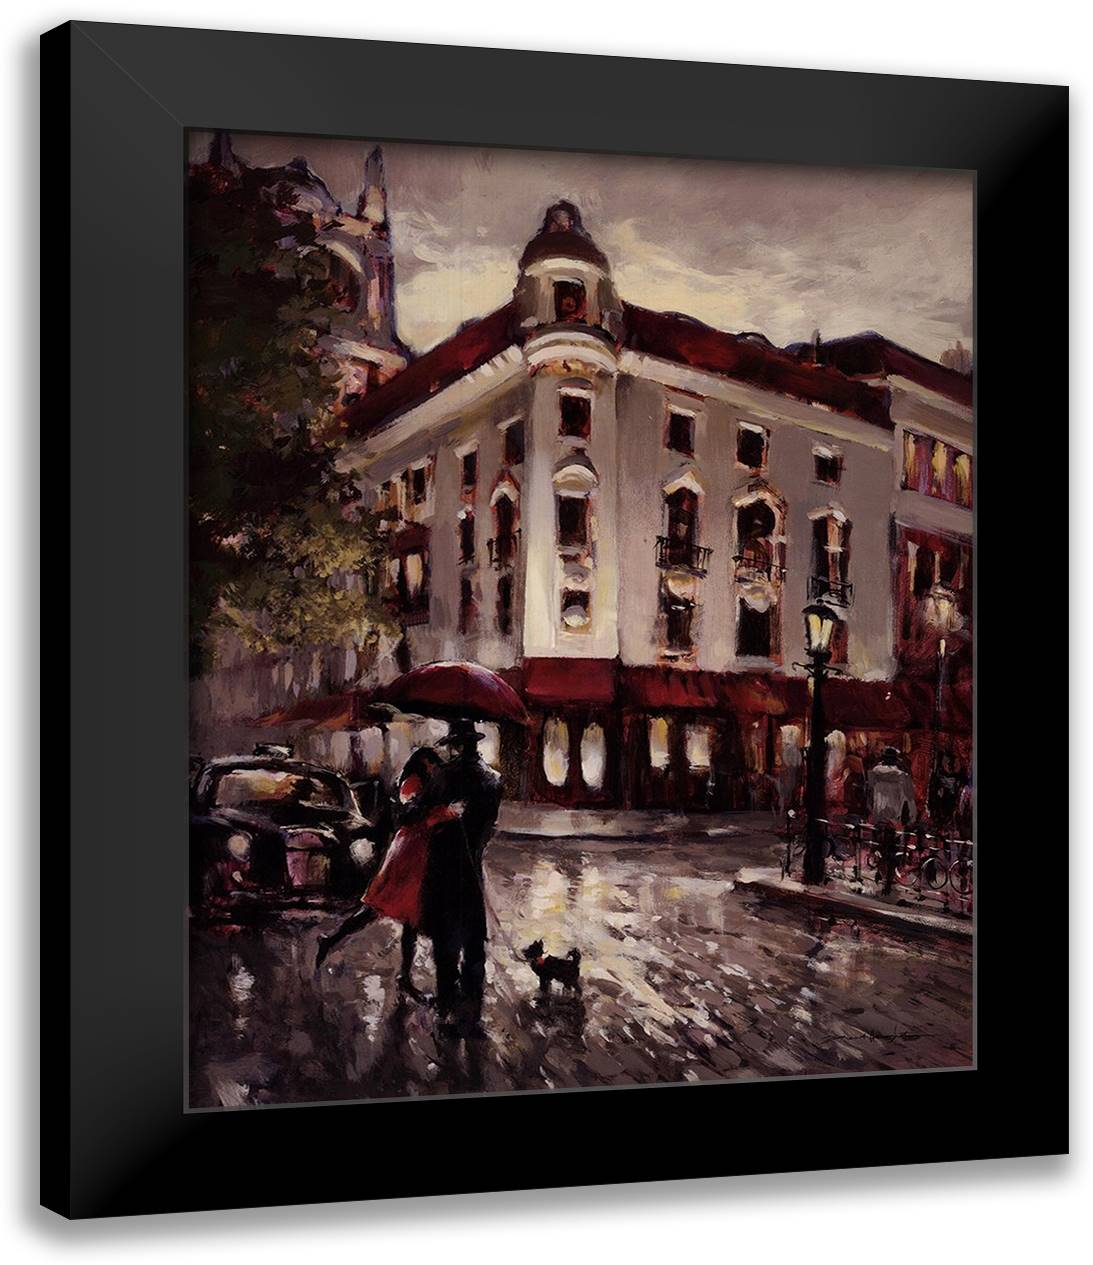 Welcome Embrace 11x13 Black Modern Wood Framed Art Print Poster by Heighton, Brent